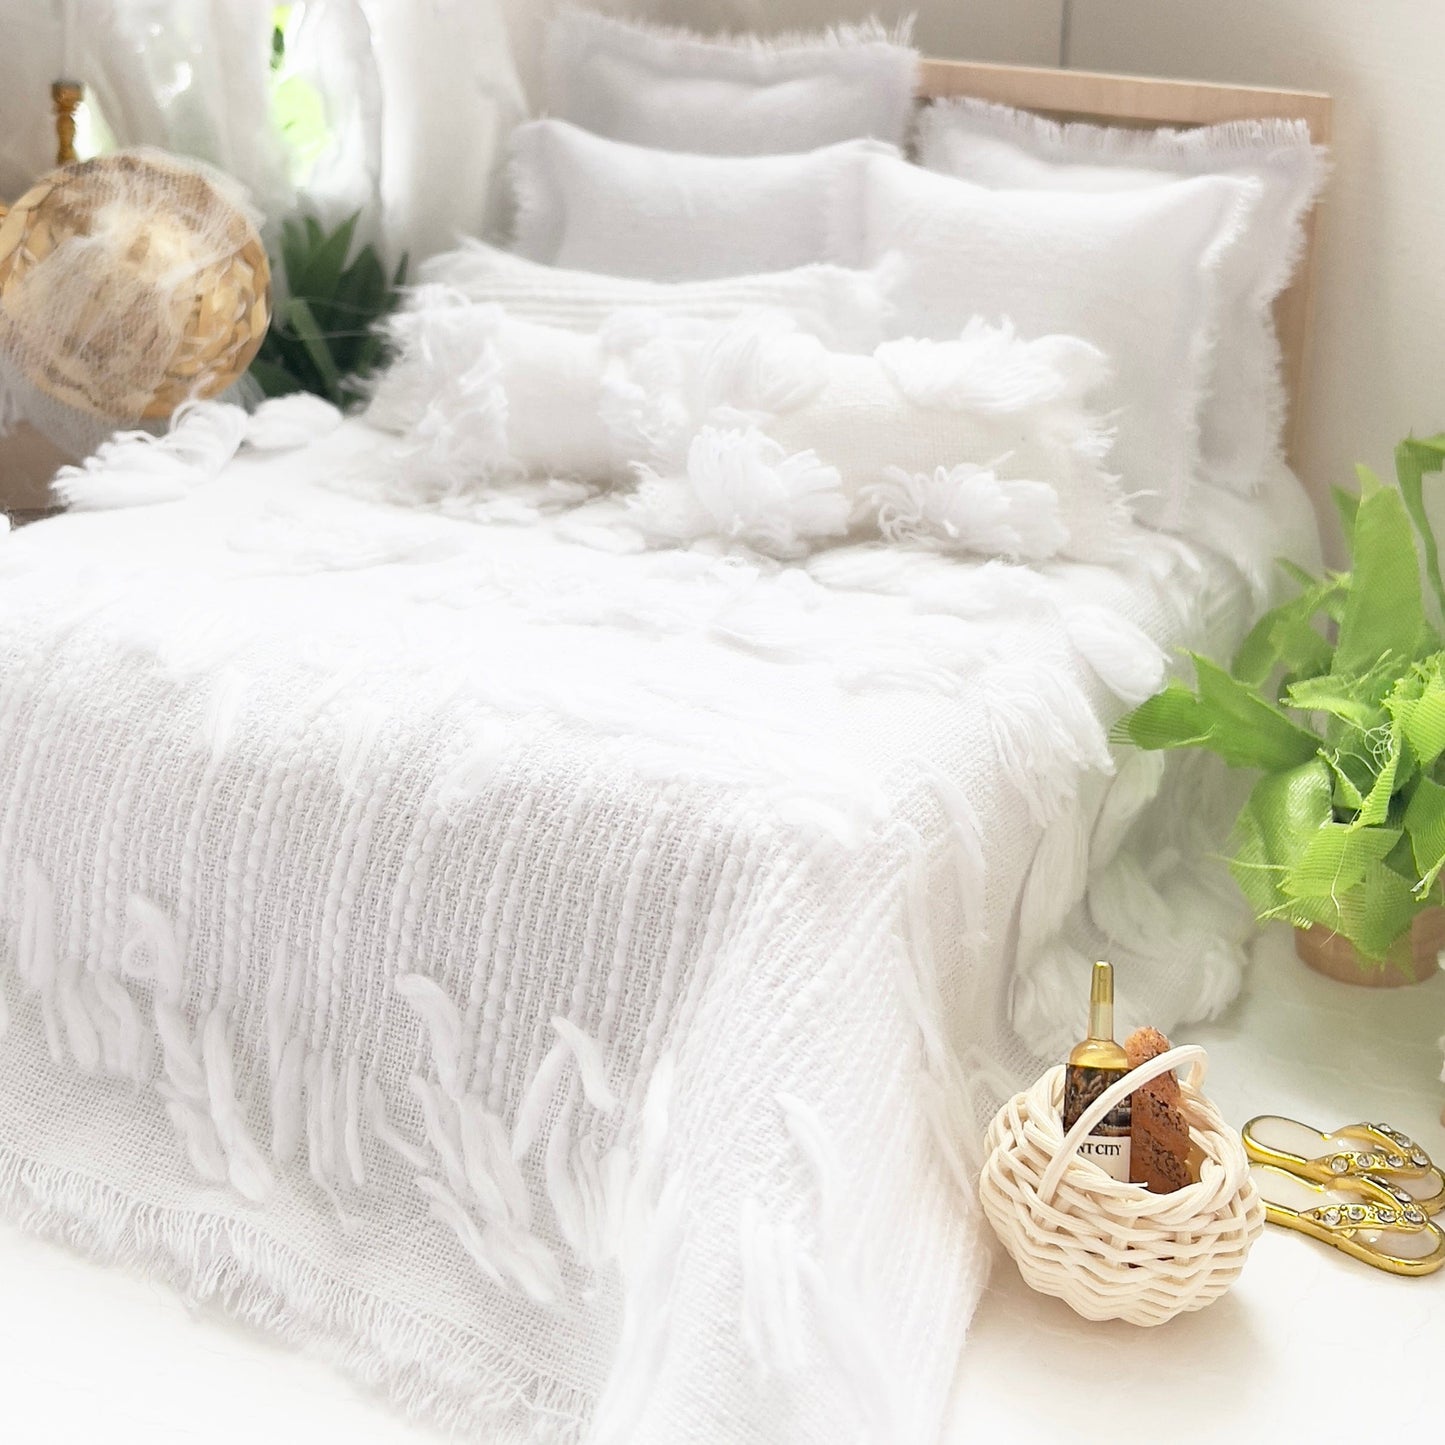 Chantallena Doll House Bohemian Wanderlust |  White Fringed and Textured Cotton Bedding Set | Theo